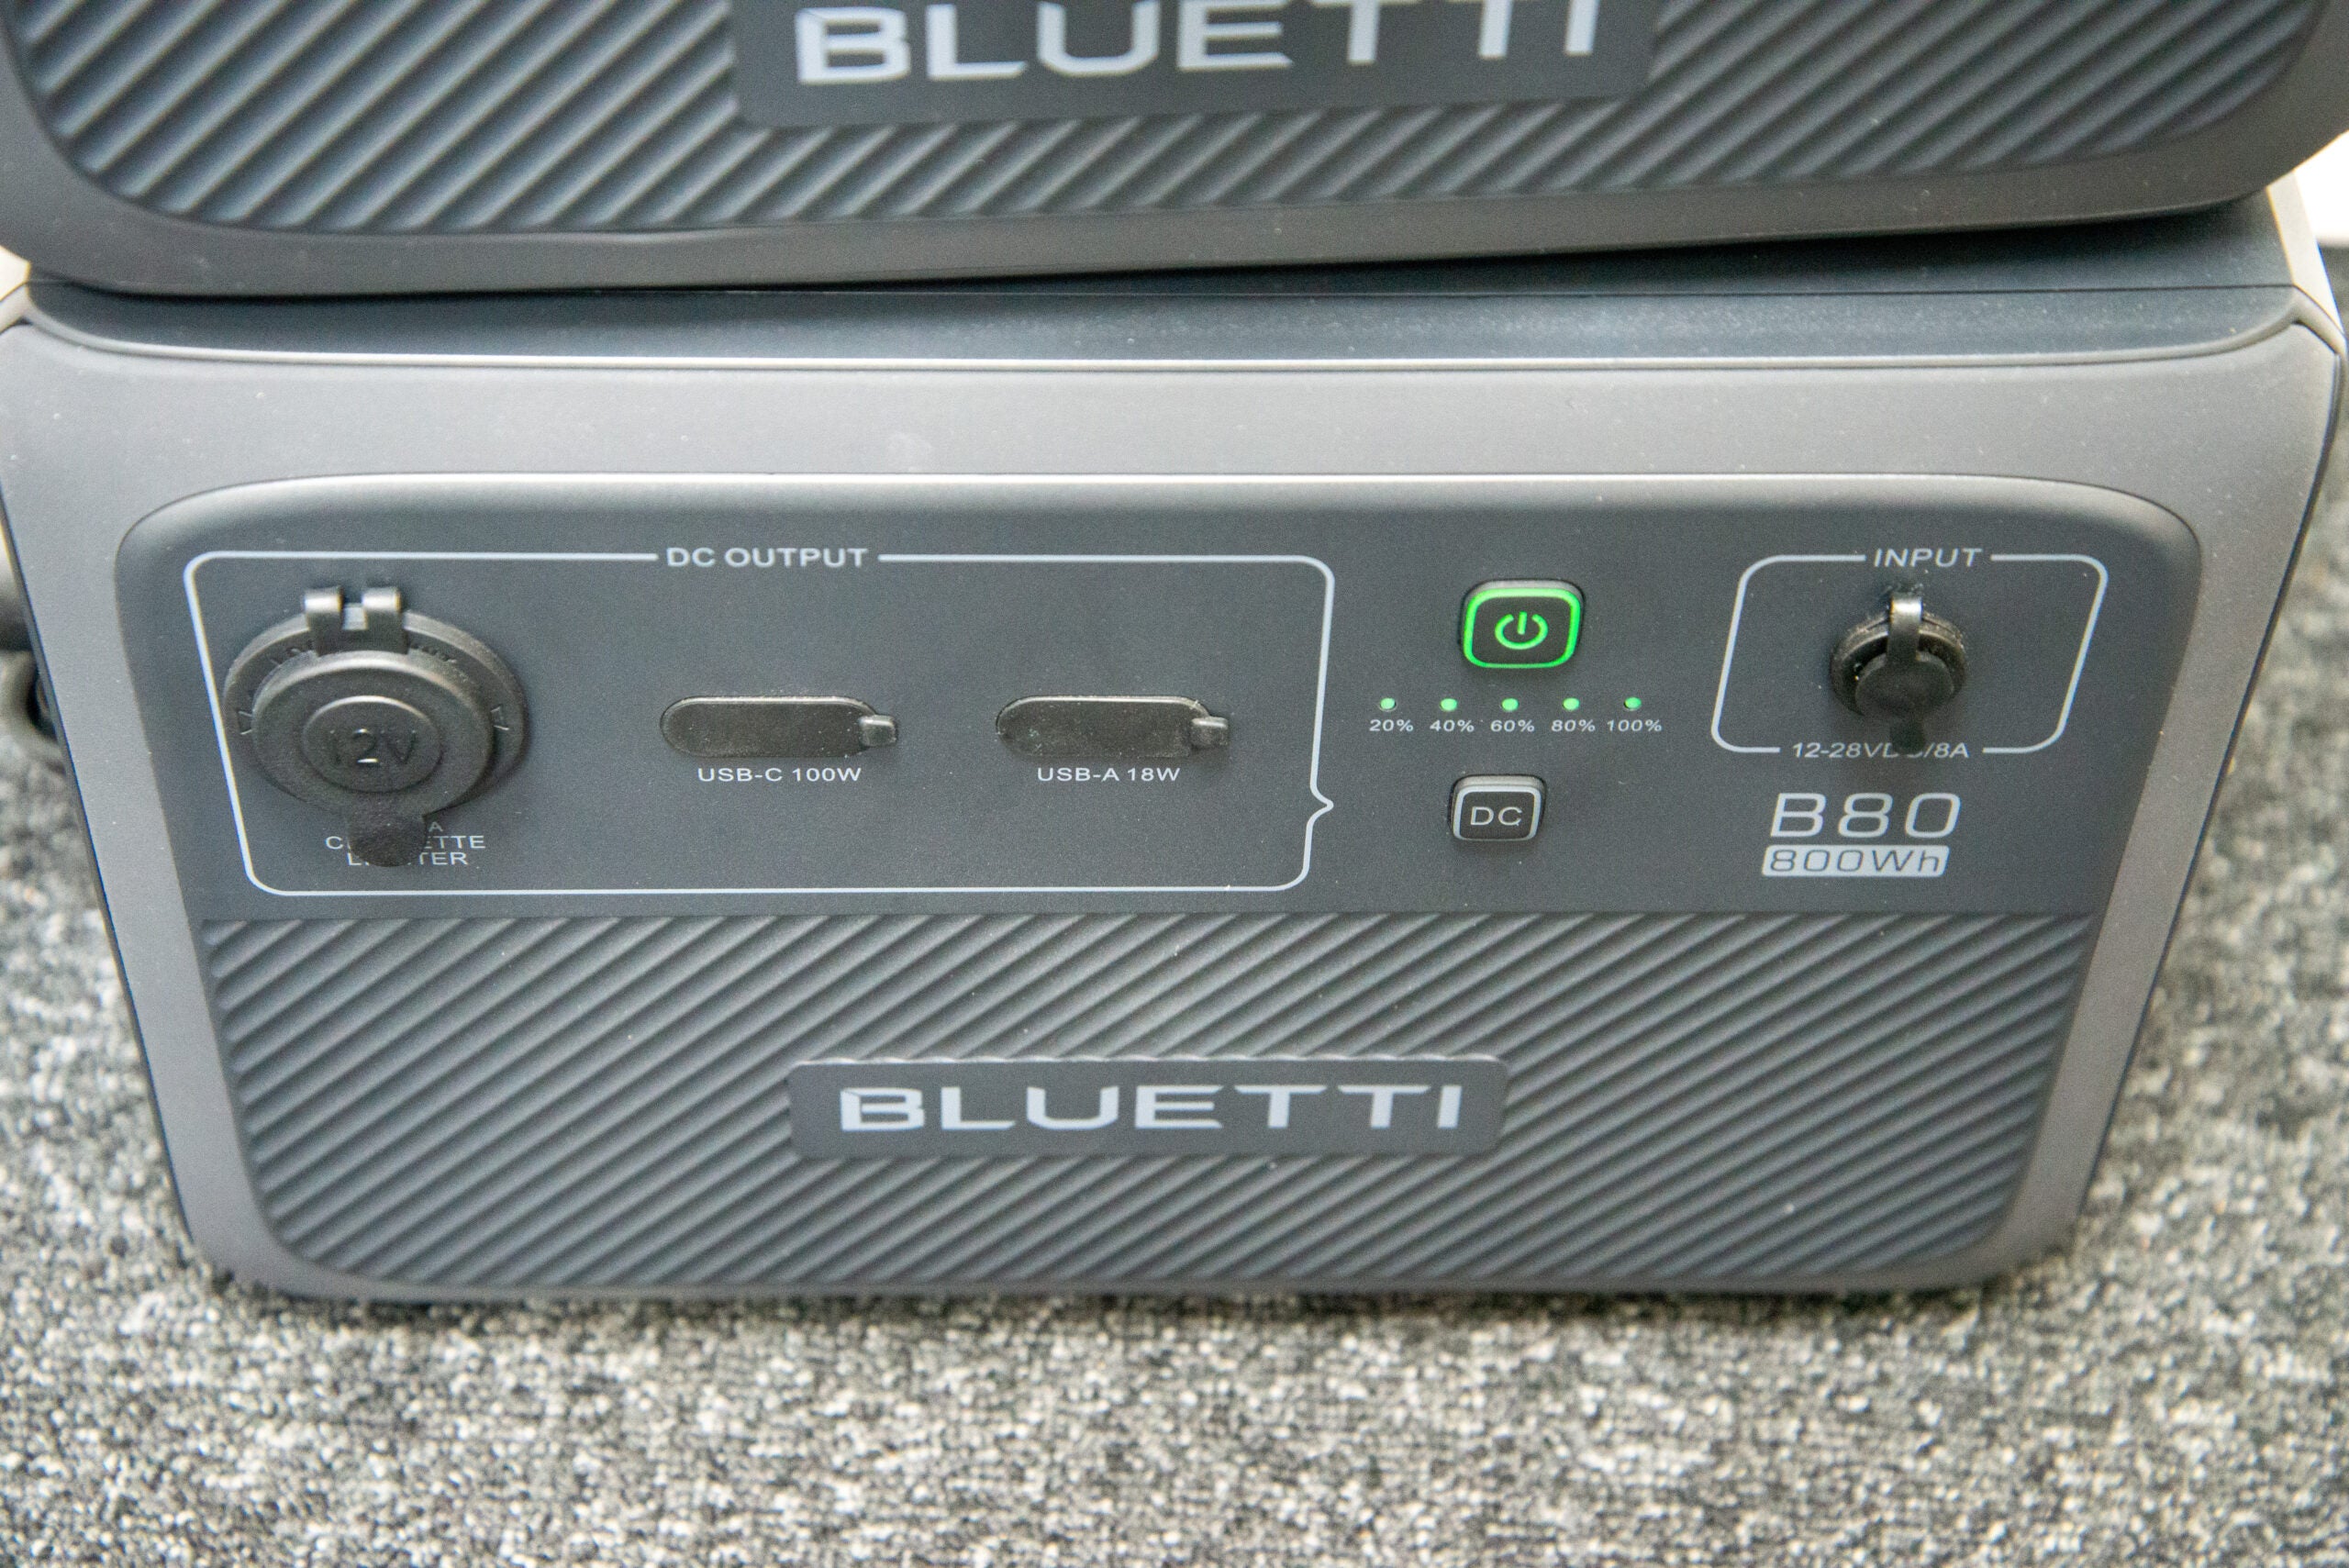 Bluetti AC60 extra battery DC outputs